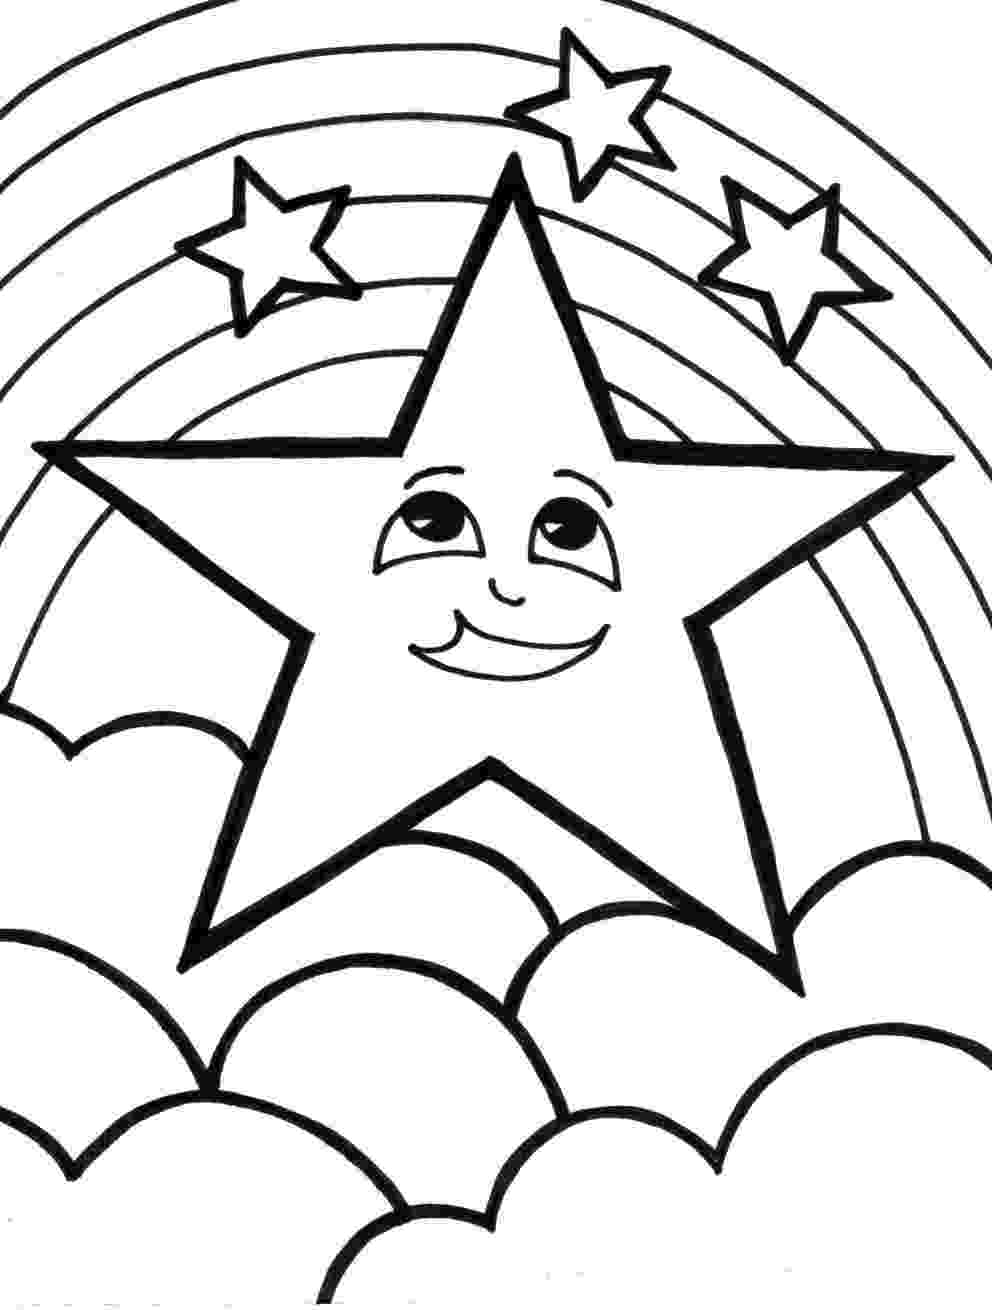 coloring pages rainbow rainbow coloring pages with color words free coloring rainbow pages coloring 